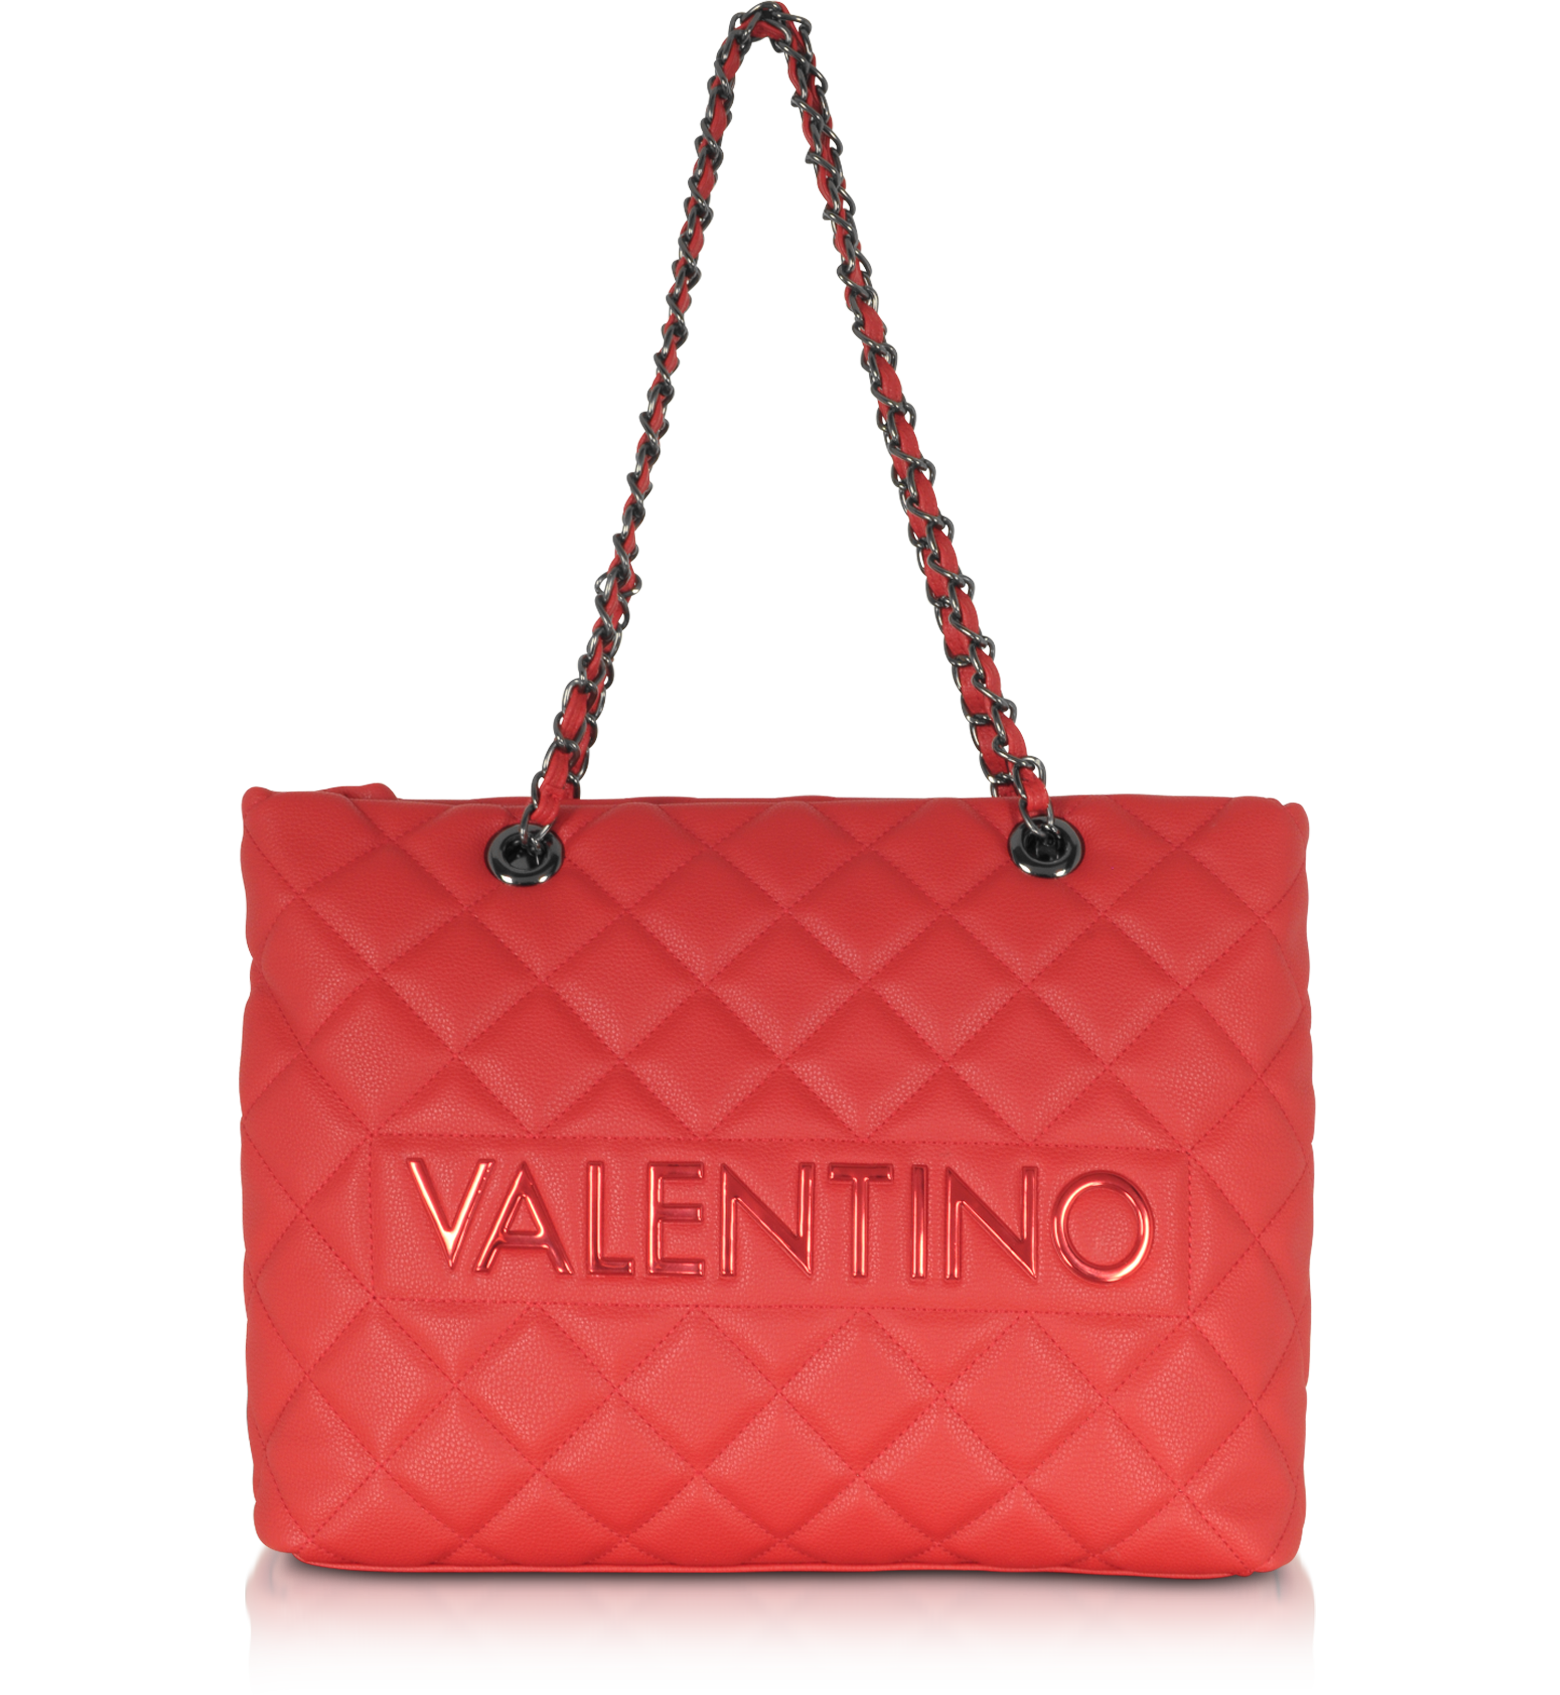 RED Valentino Transparent Tote Bag at FORZIERI